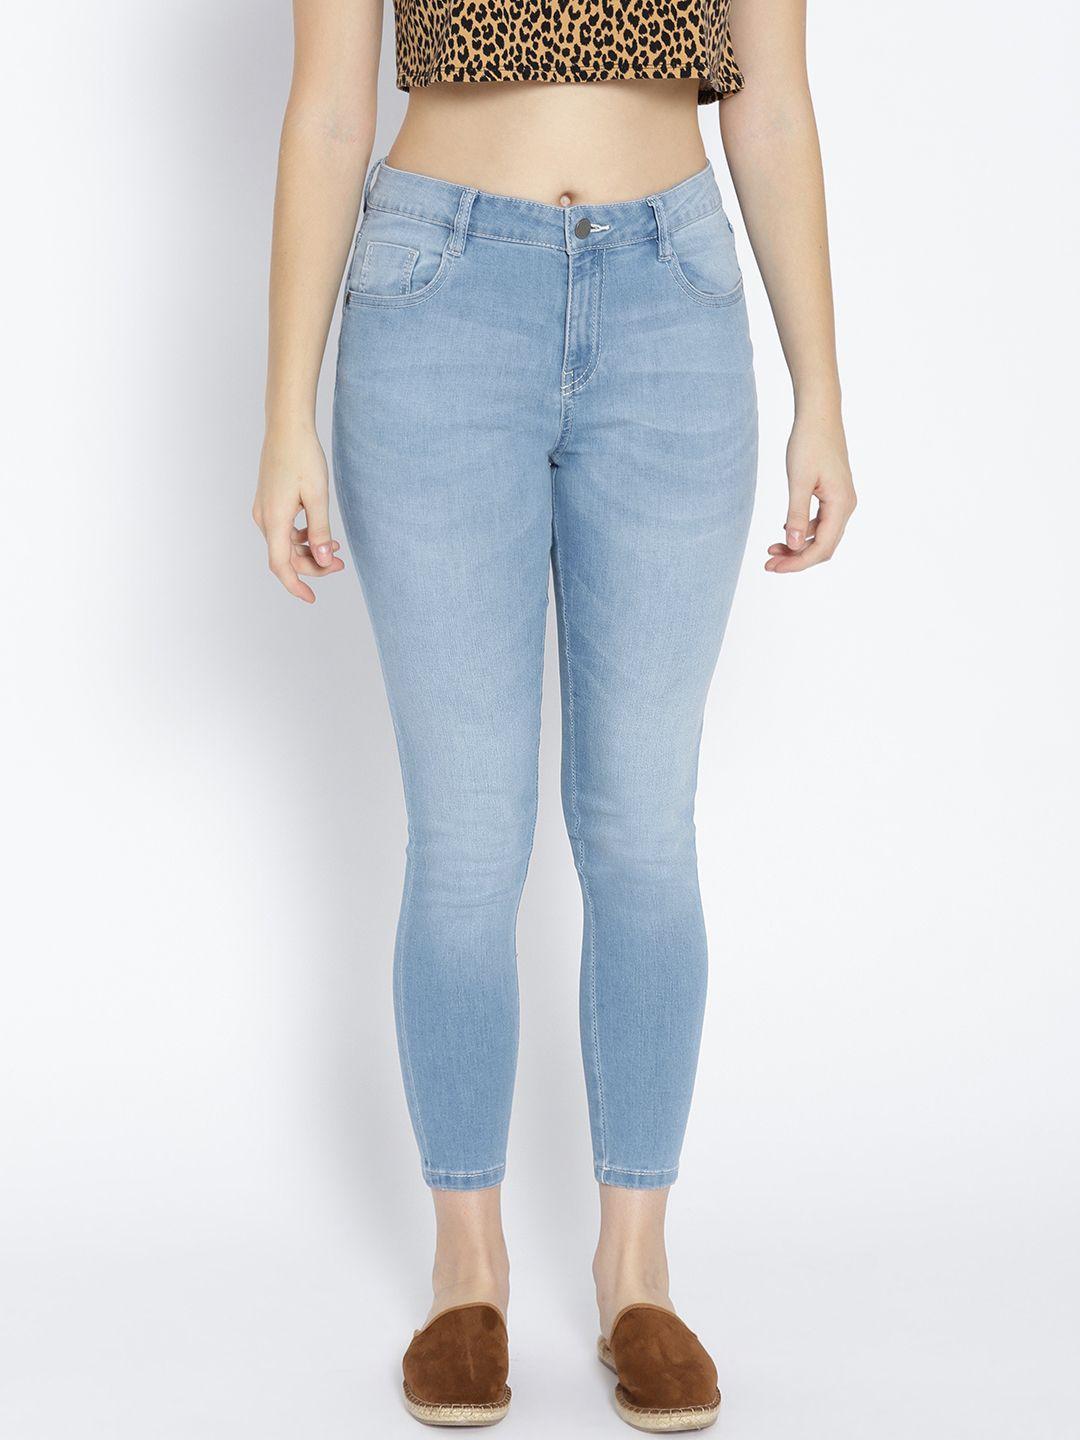 dressberry-women-blue-skinny-fit-mid-rise-clean-look-cropped-stretchable-jeans